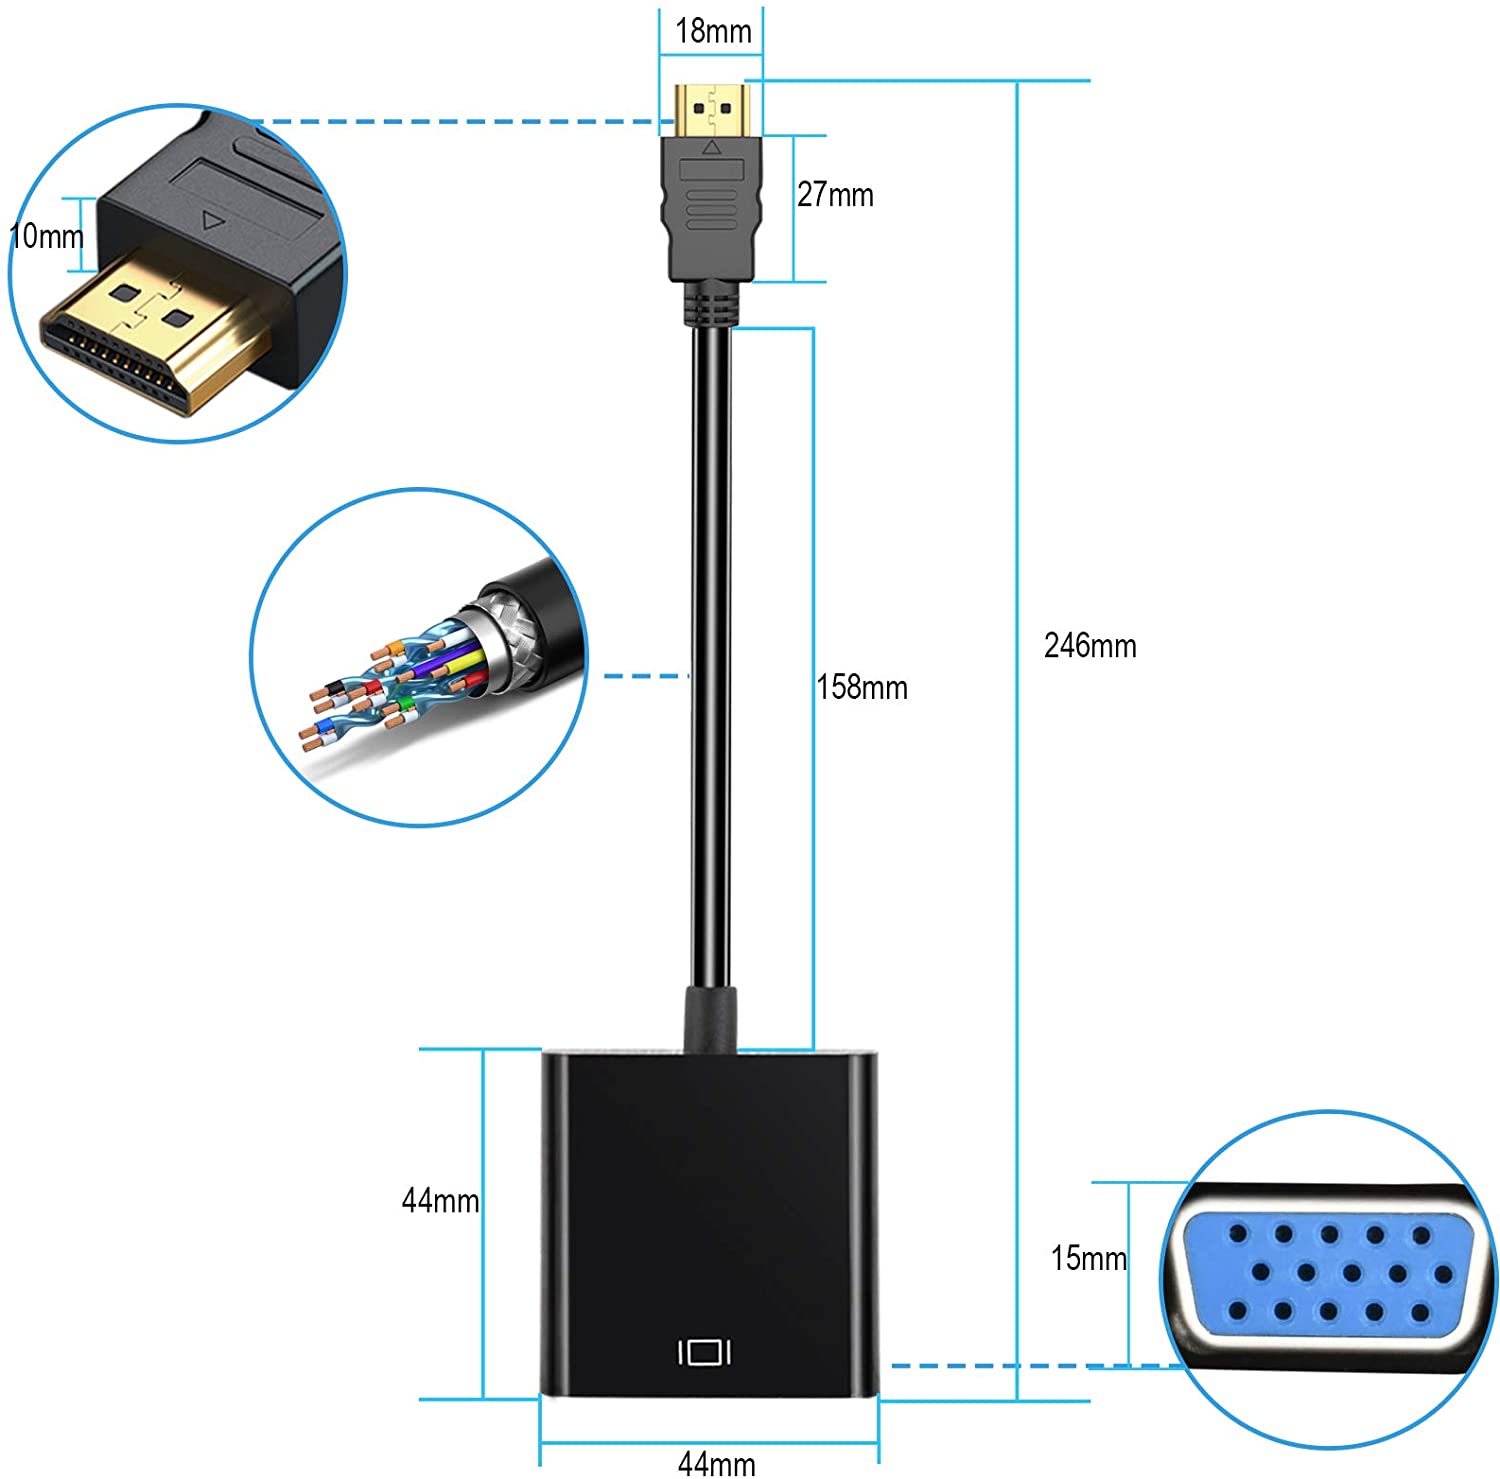 Rybozen HDMI to VGA, Gold-Plated HDMI to VGA Adapter (Male to Female) Support Computer, Desktop, Laptop, PC, Monitor, Projector, HDTV, Chromebook, Raspberry Pi, Roku, Xbox and More